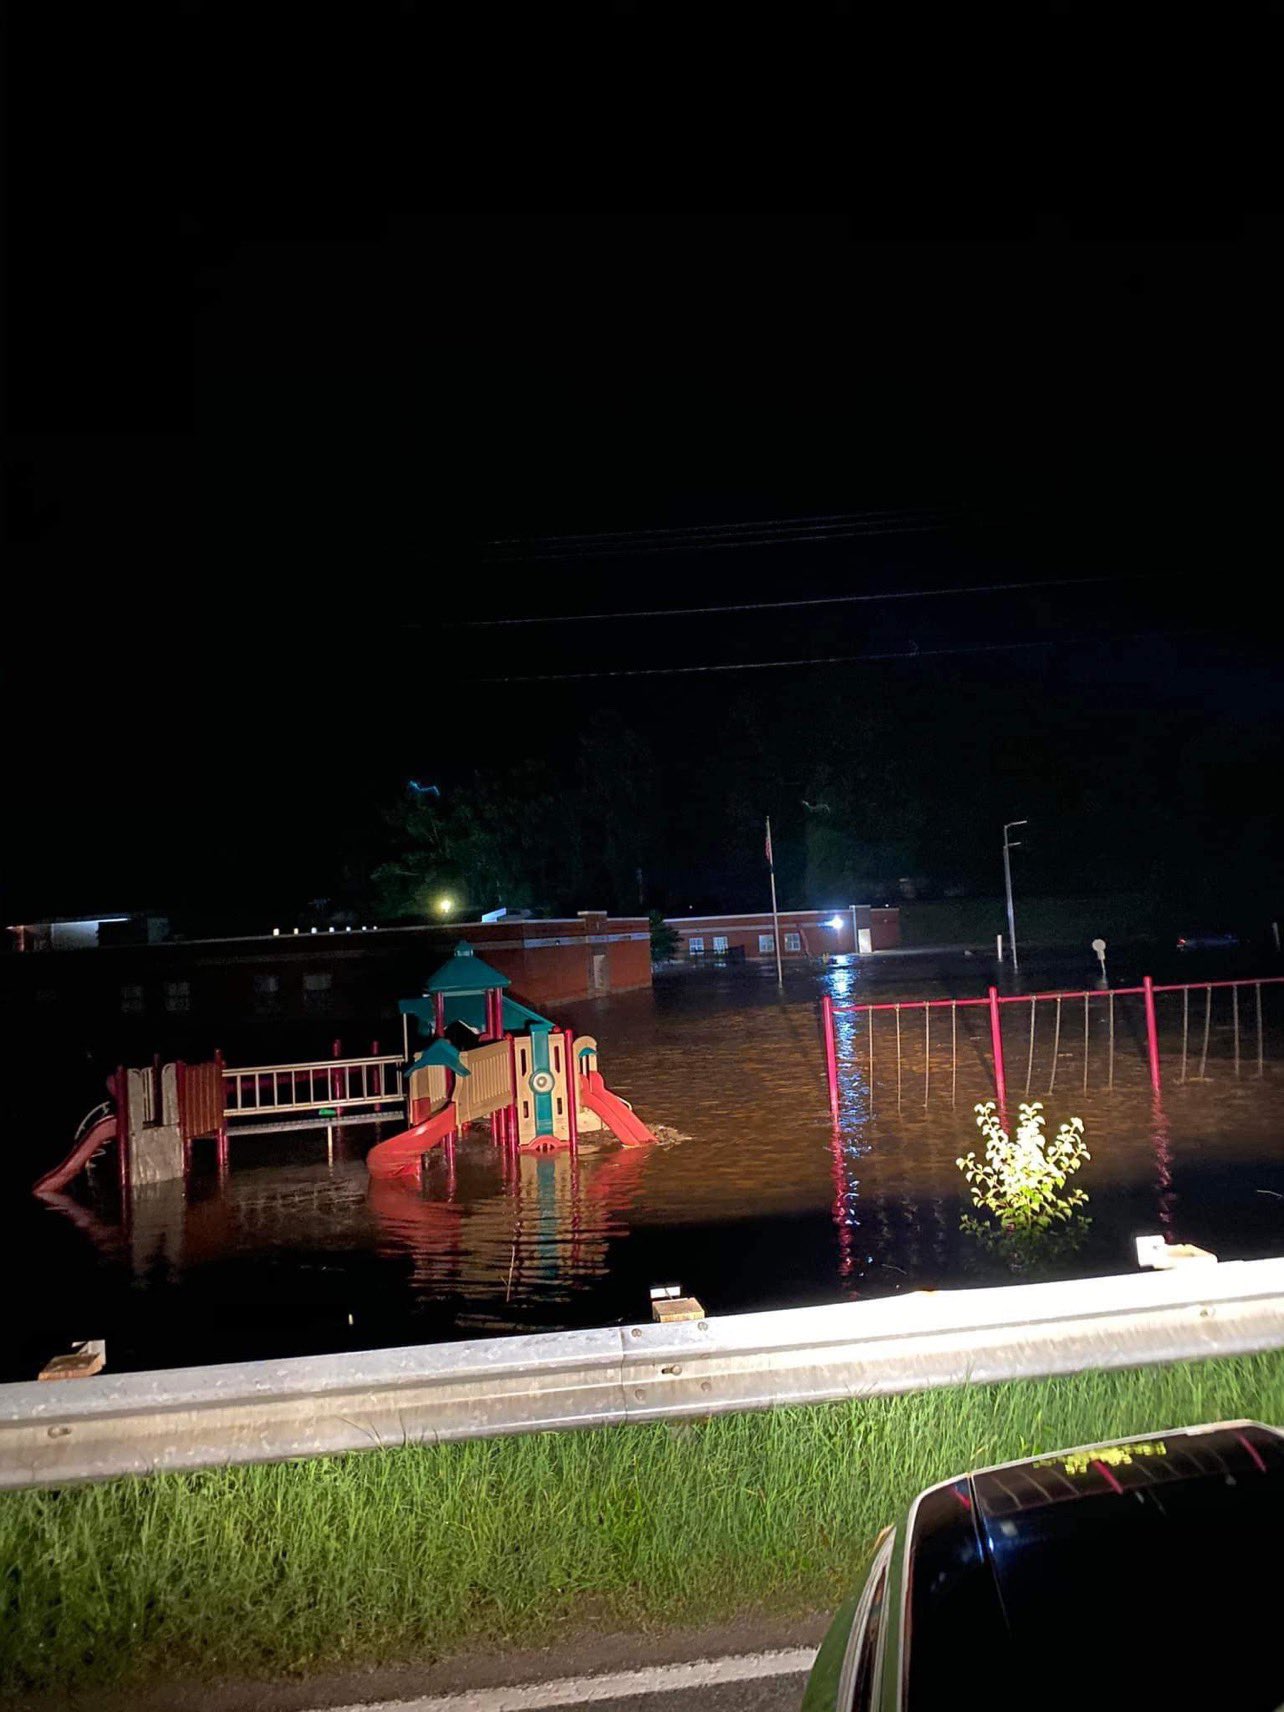 Buckhorn School's playground under water due to flash flooding in Perry County, KY